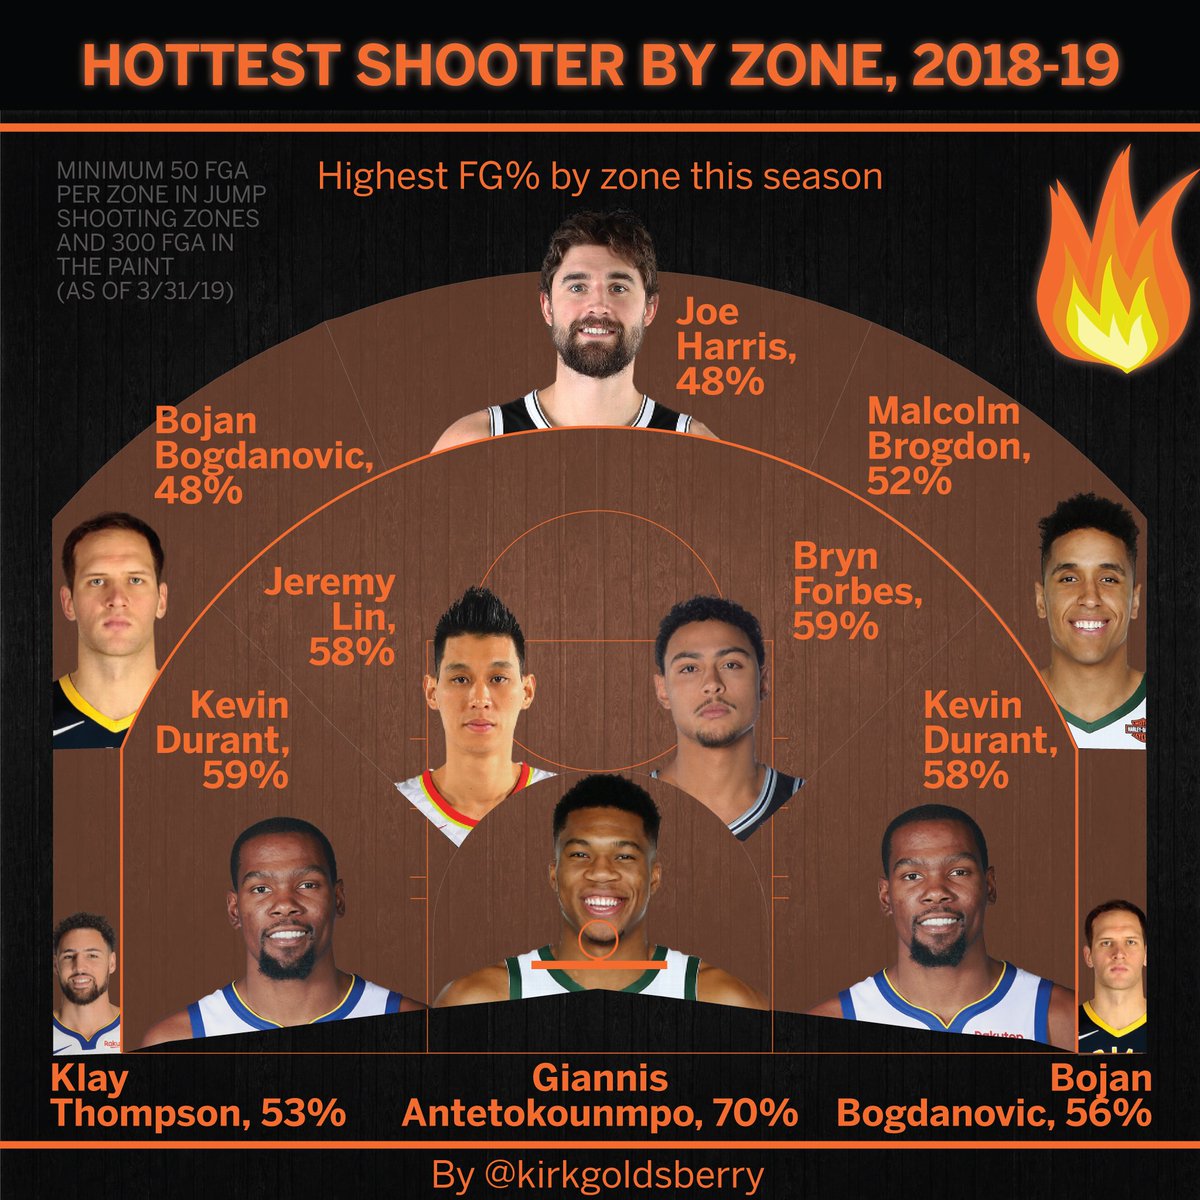 Kirk Goldsberry On Twitter Hottest Shooters By Zone